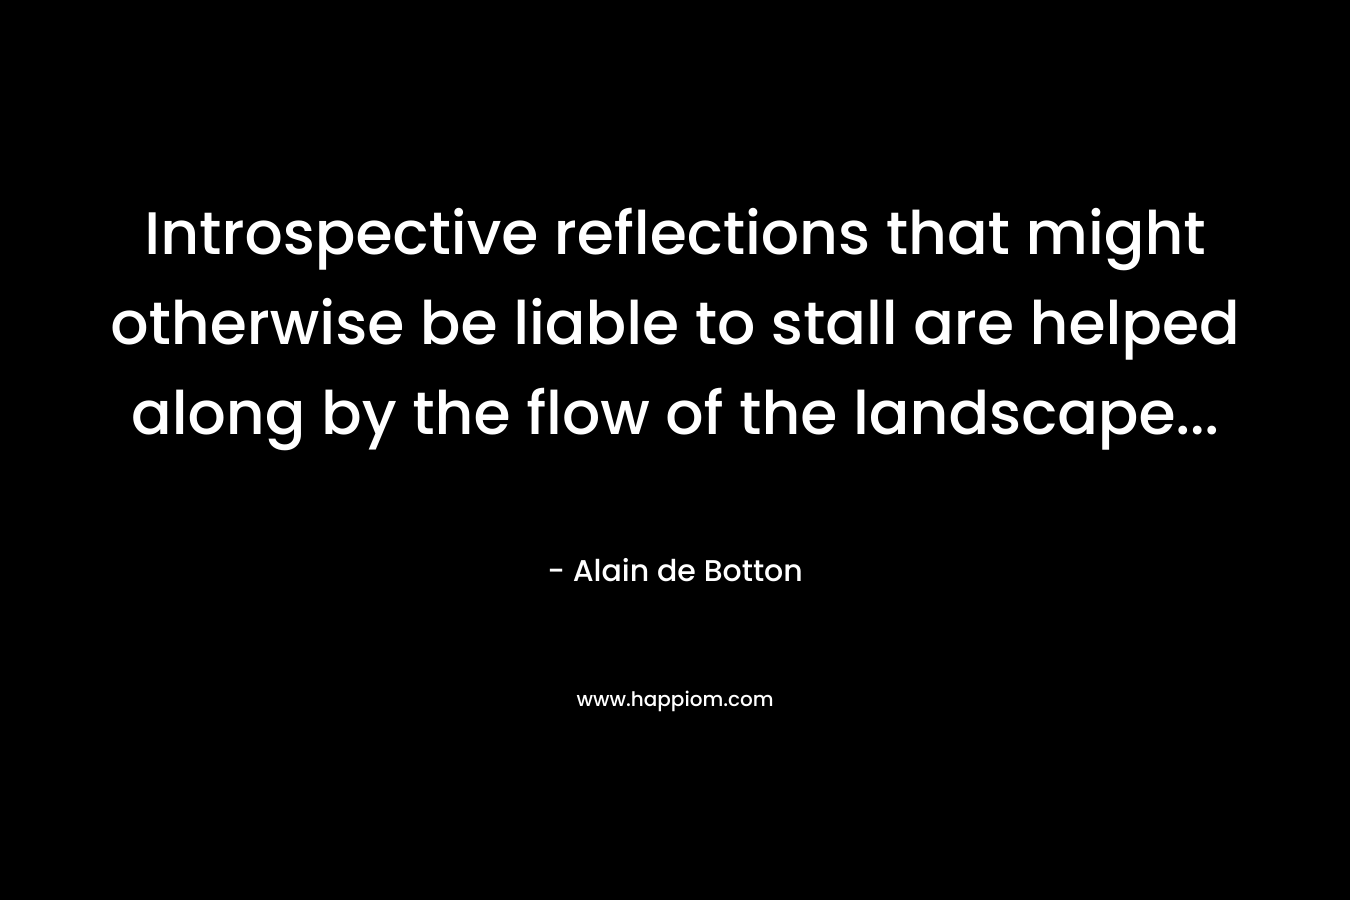 Introspective reflections that might otherwise be liable to stall are helped along by the flow of the landscape...